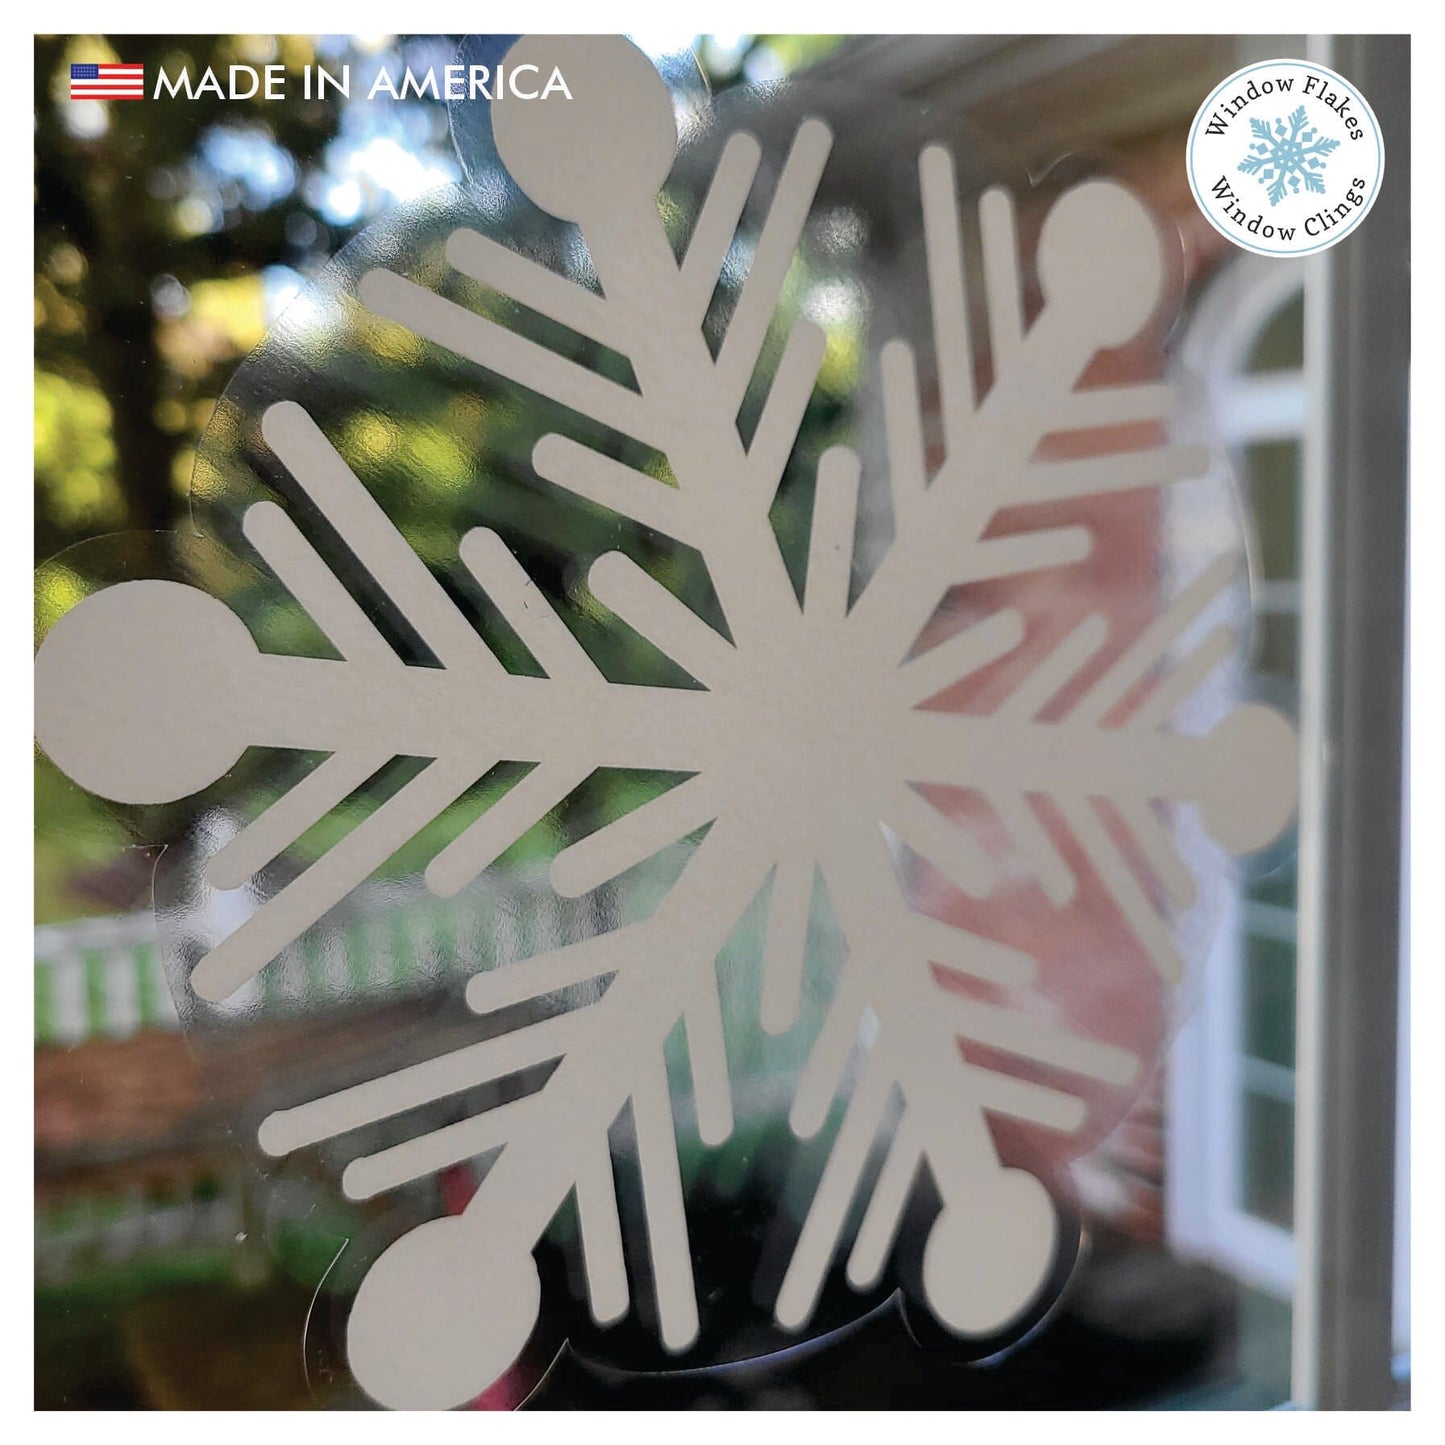 14 Snowflake decal clings: 12, 8 and 6 snowflake decals included –  Window Flakes